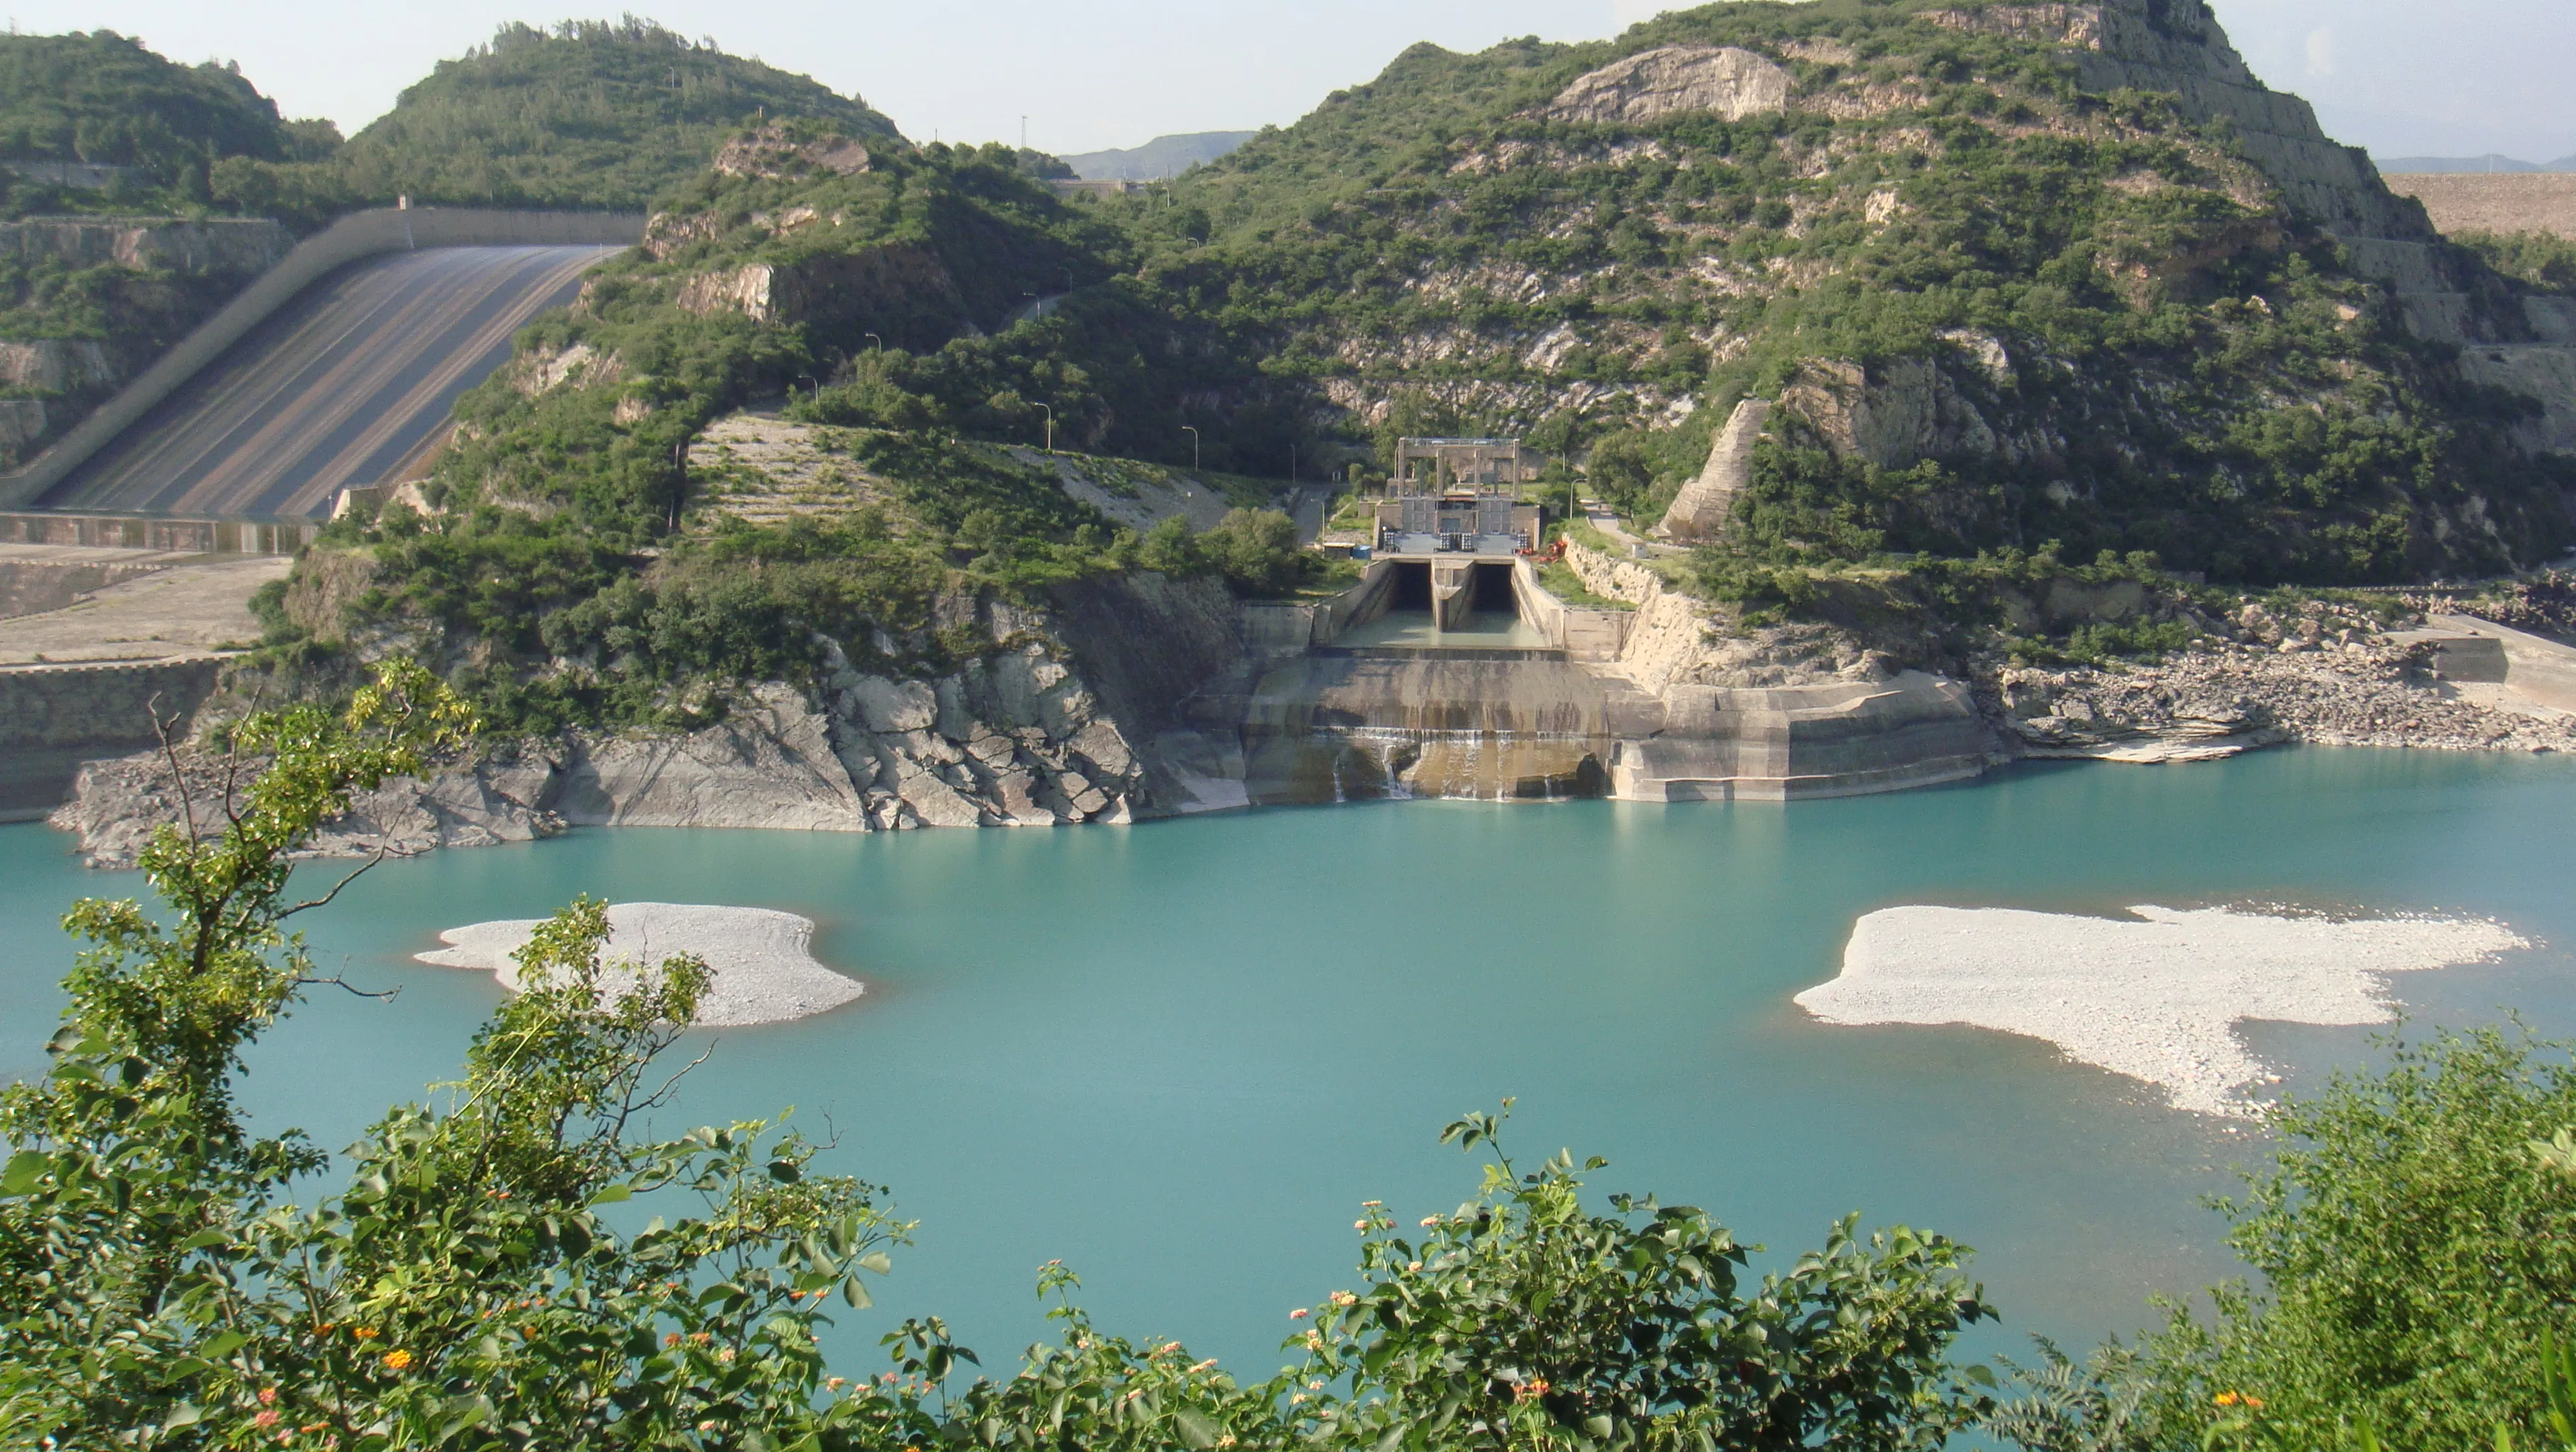 Tarbela Dam in Pakistan, South Asia | Architecture - Rated 3.7